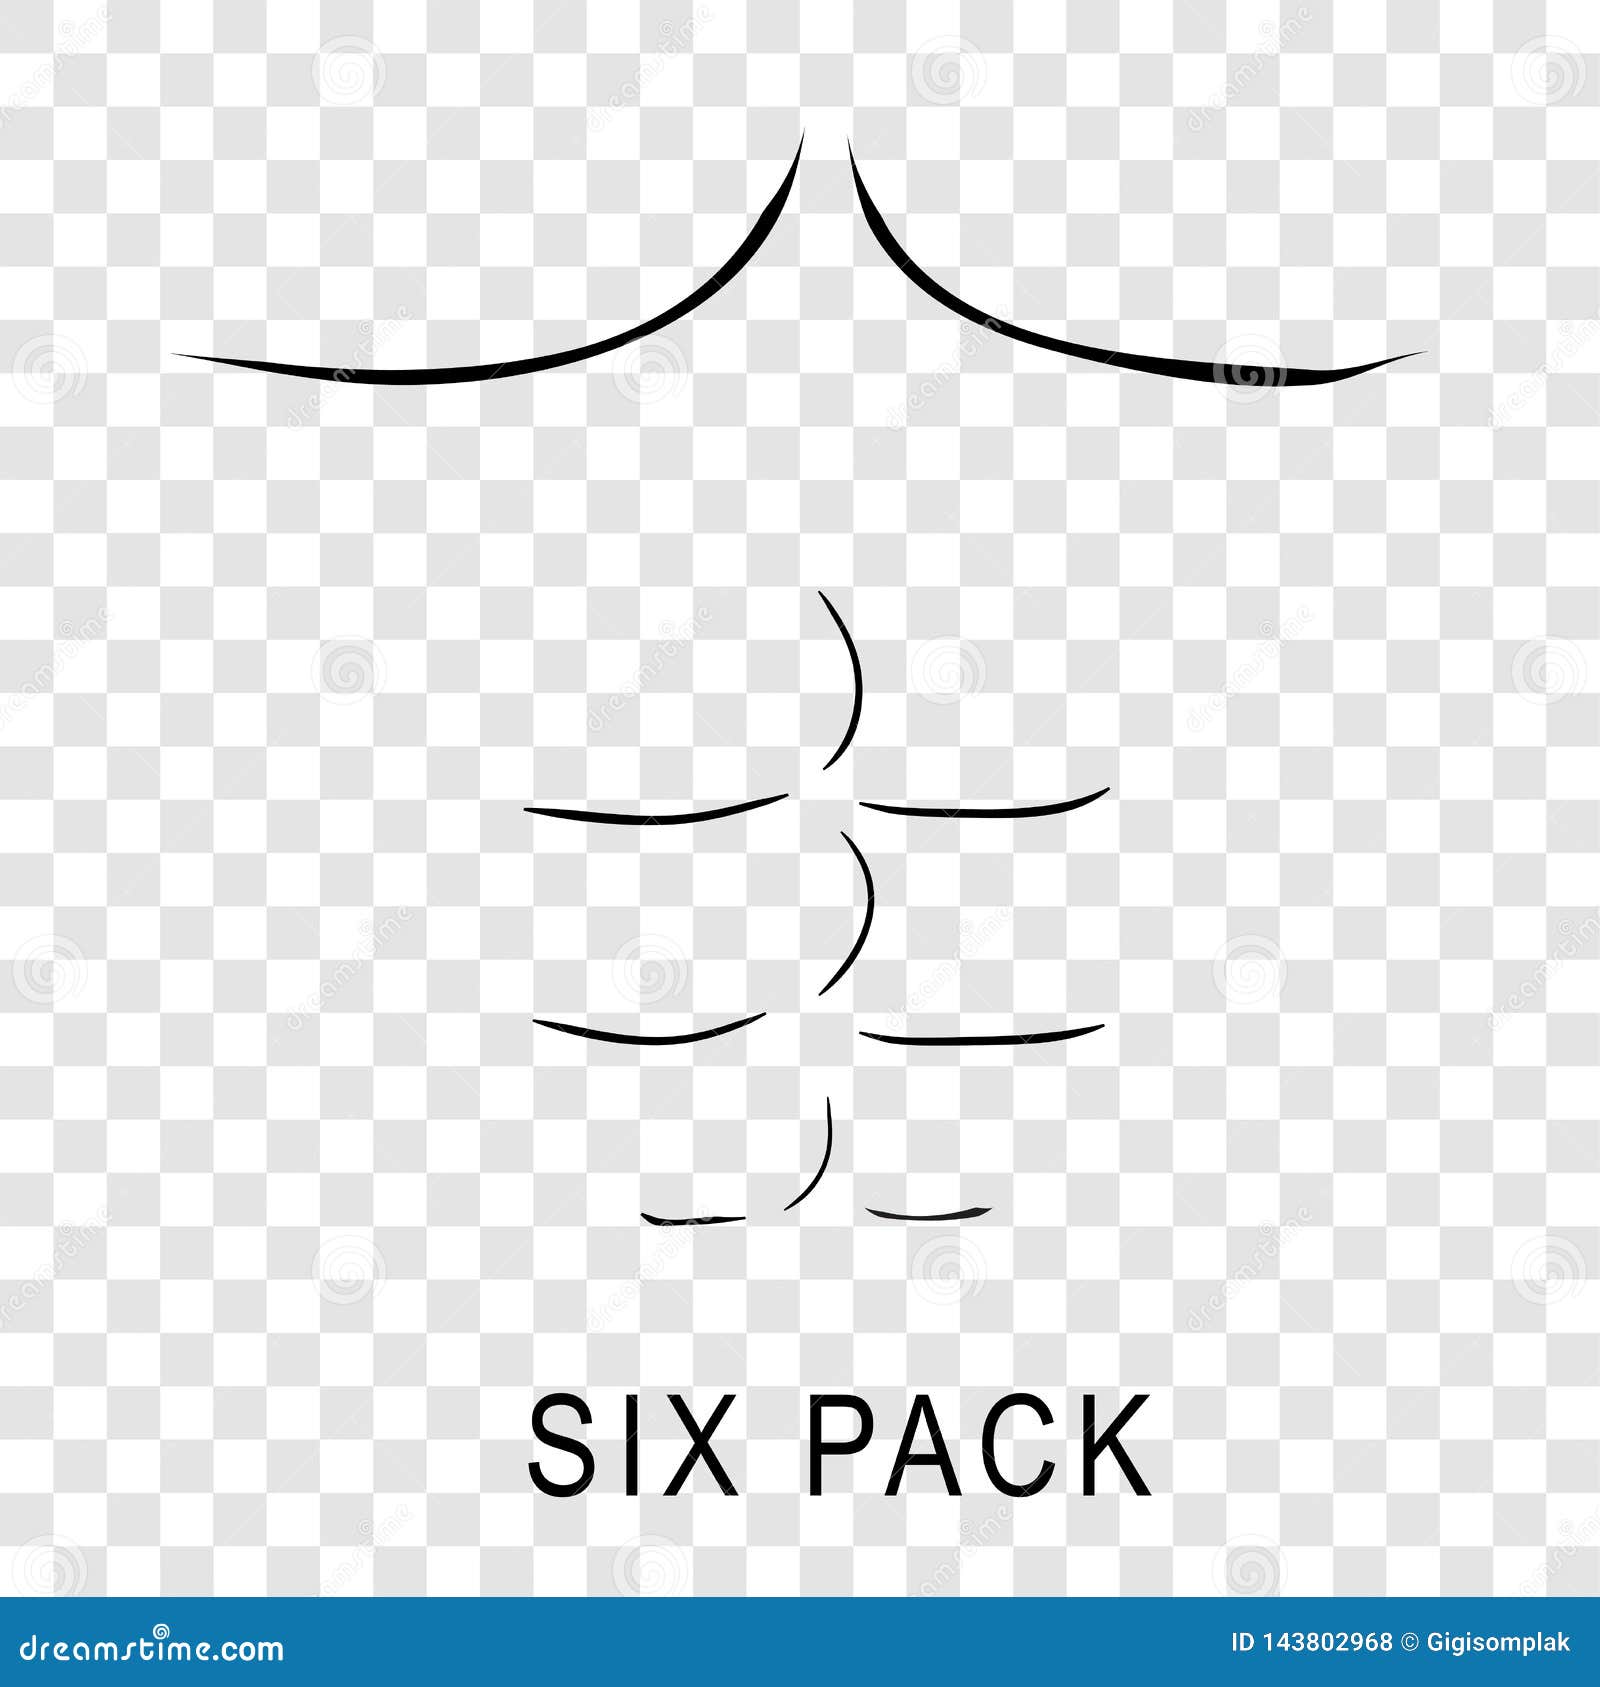 How To Draw A Six Pack Step By Step